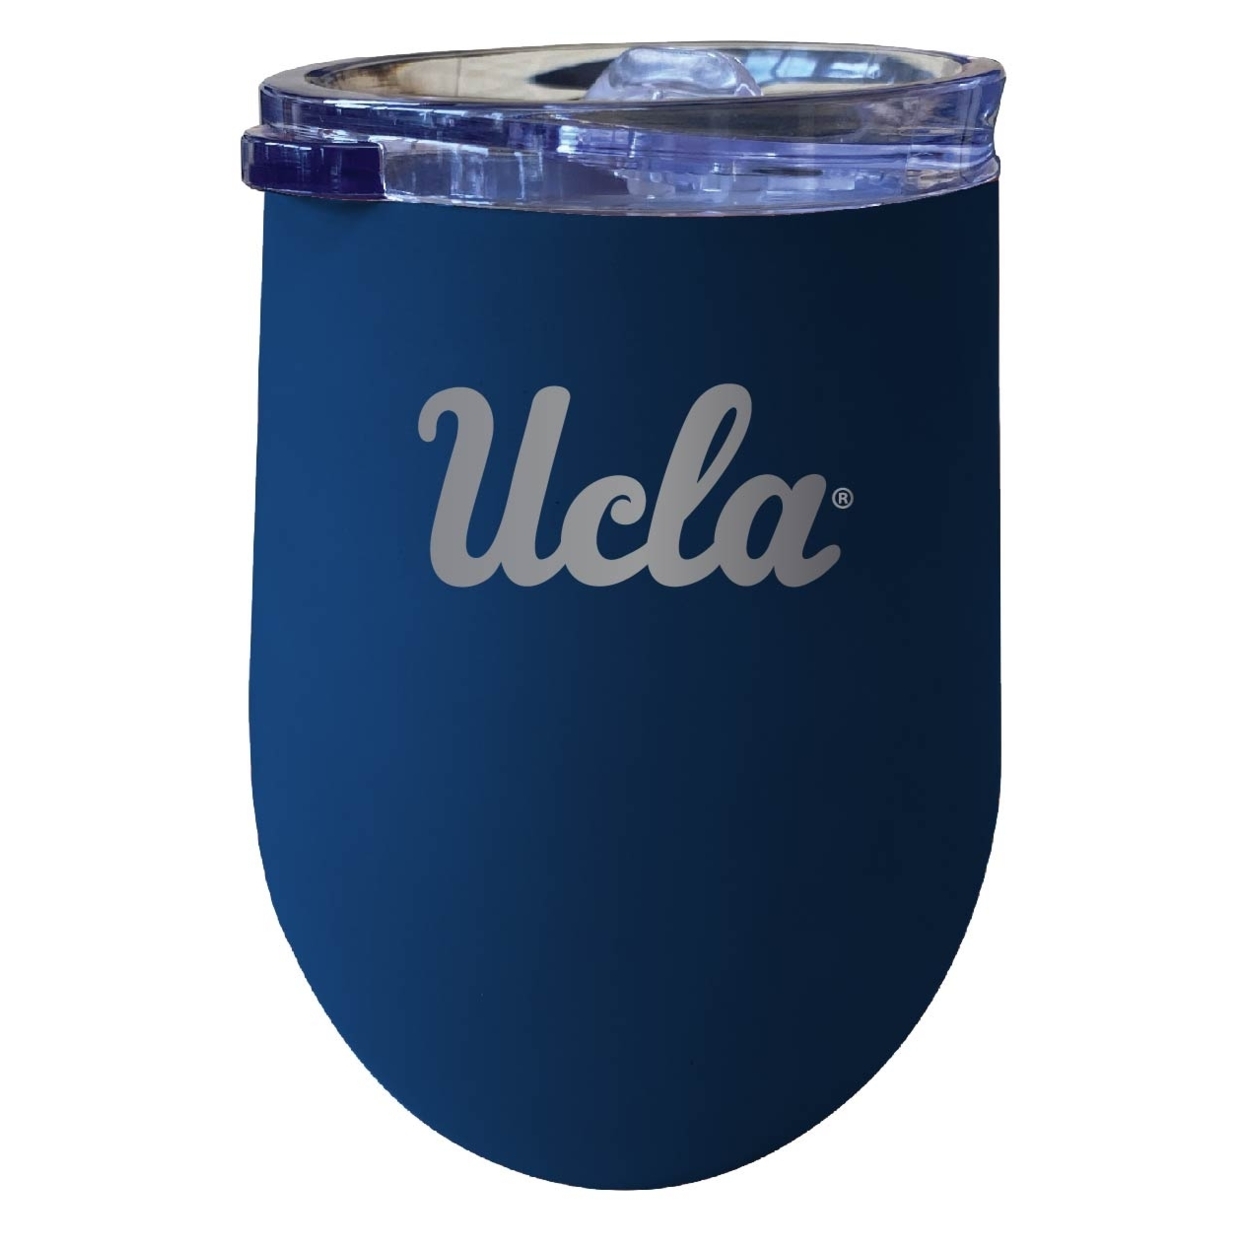 UCLA Bruins 12 Oz Etched Insulated Wine Stainless Steel Tumbler - Choose Your Color - Navy